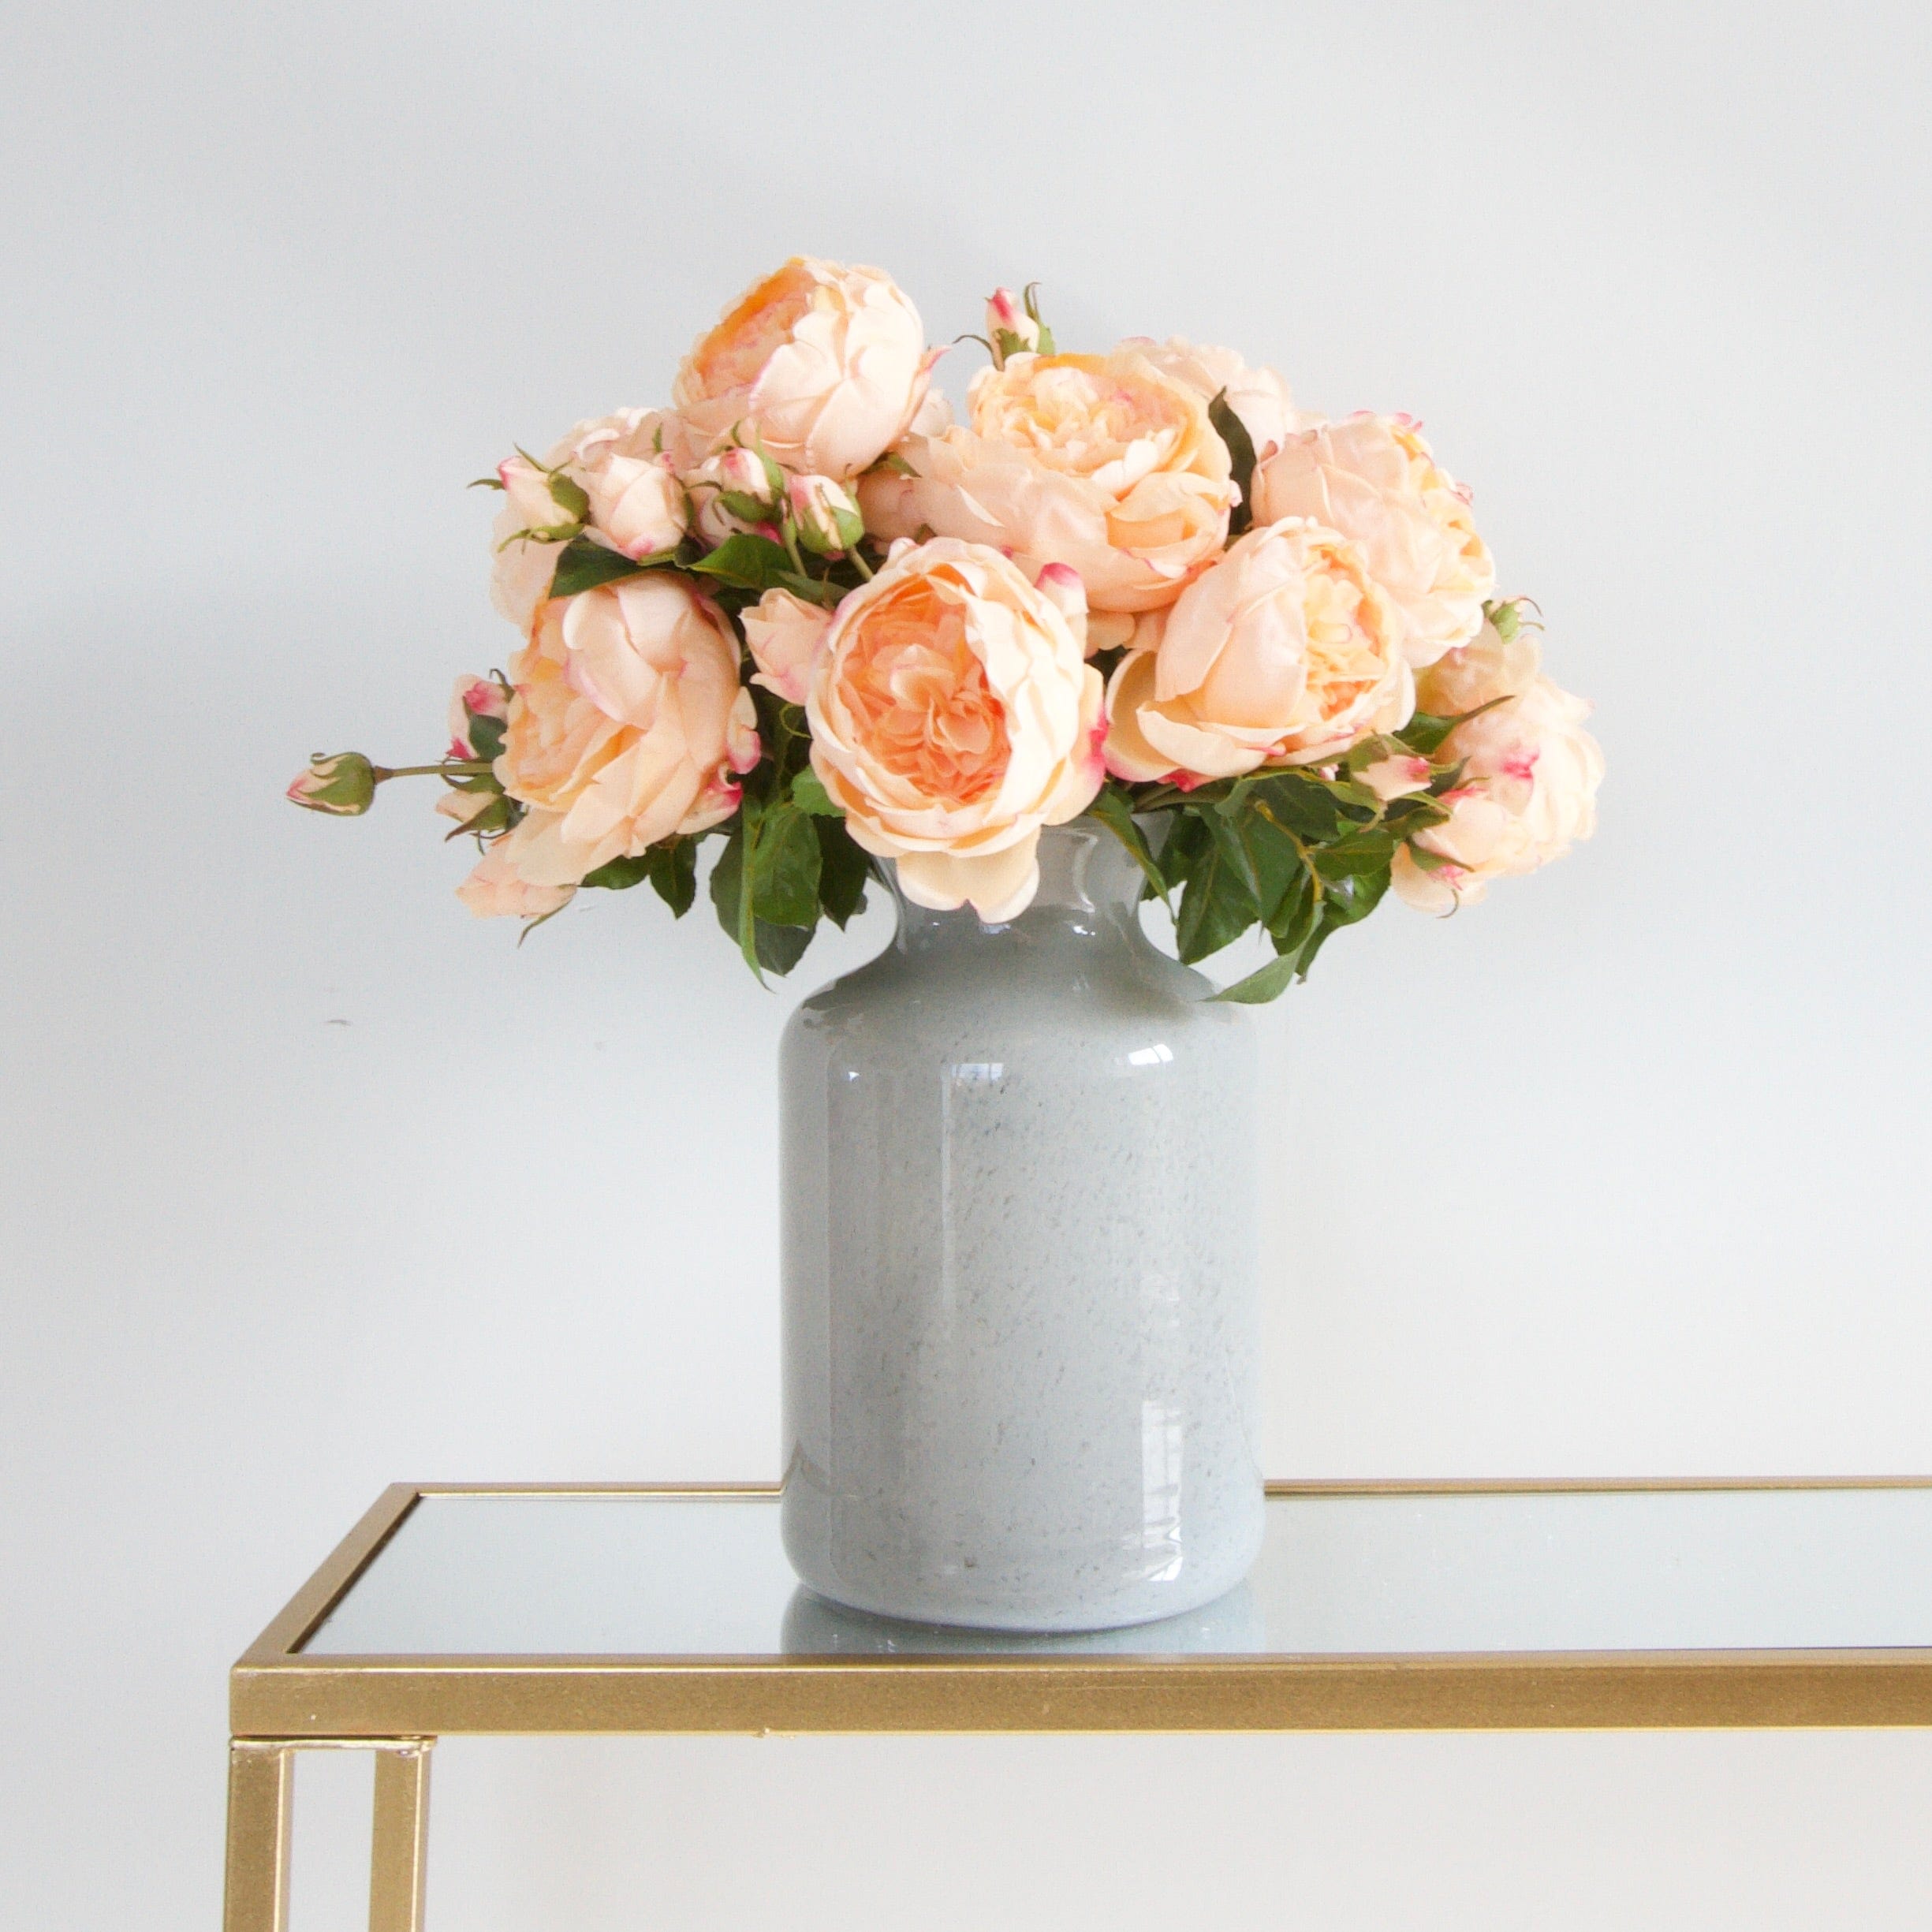 Luxury Lifelike Realistic Artificial Fabric Silk Blooms with Foliage Buy Online from The Faux Flower Company | 12 stems Peach English Rose ABY5013PC styled in Grey Glass Funnel Neck Vase ABV0144